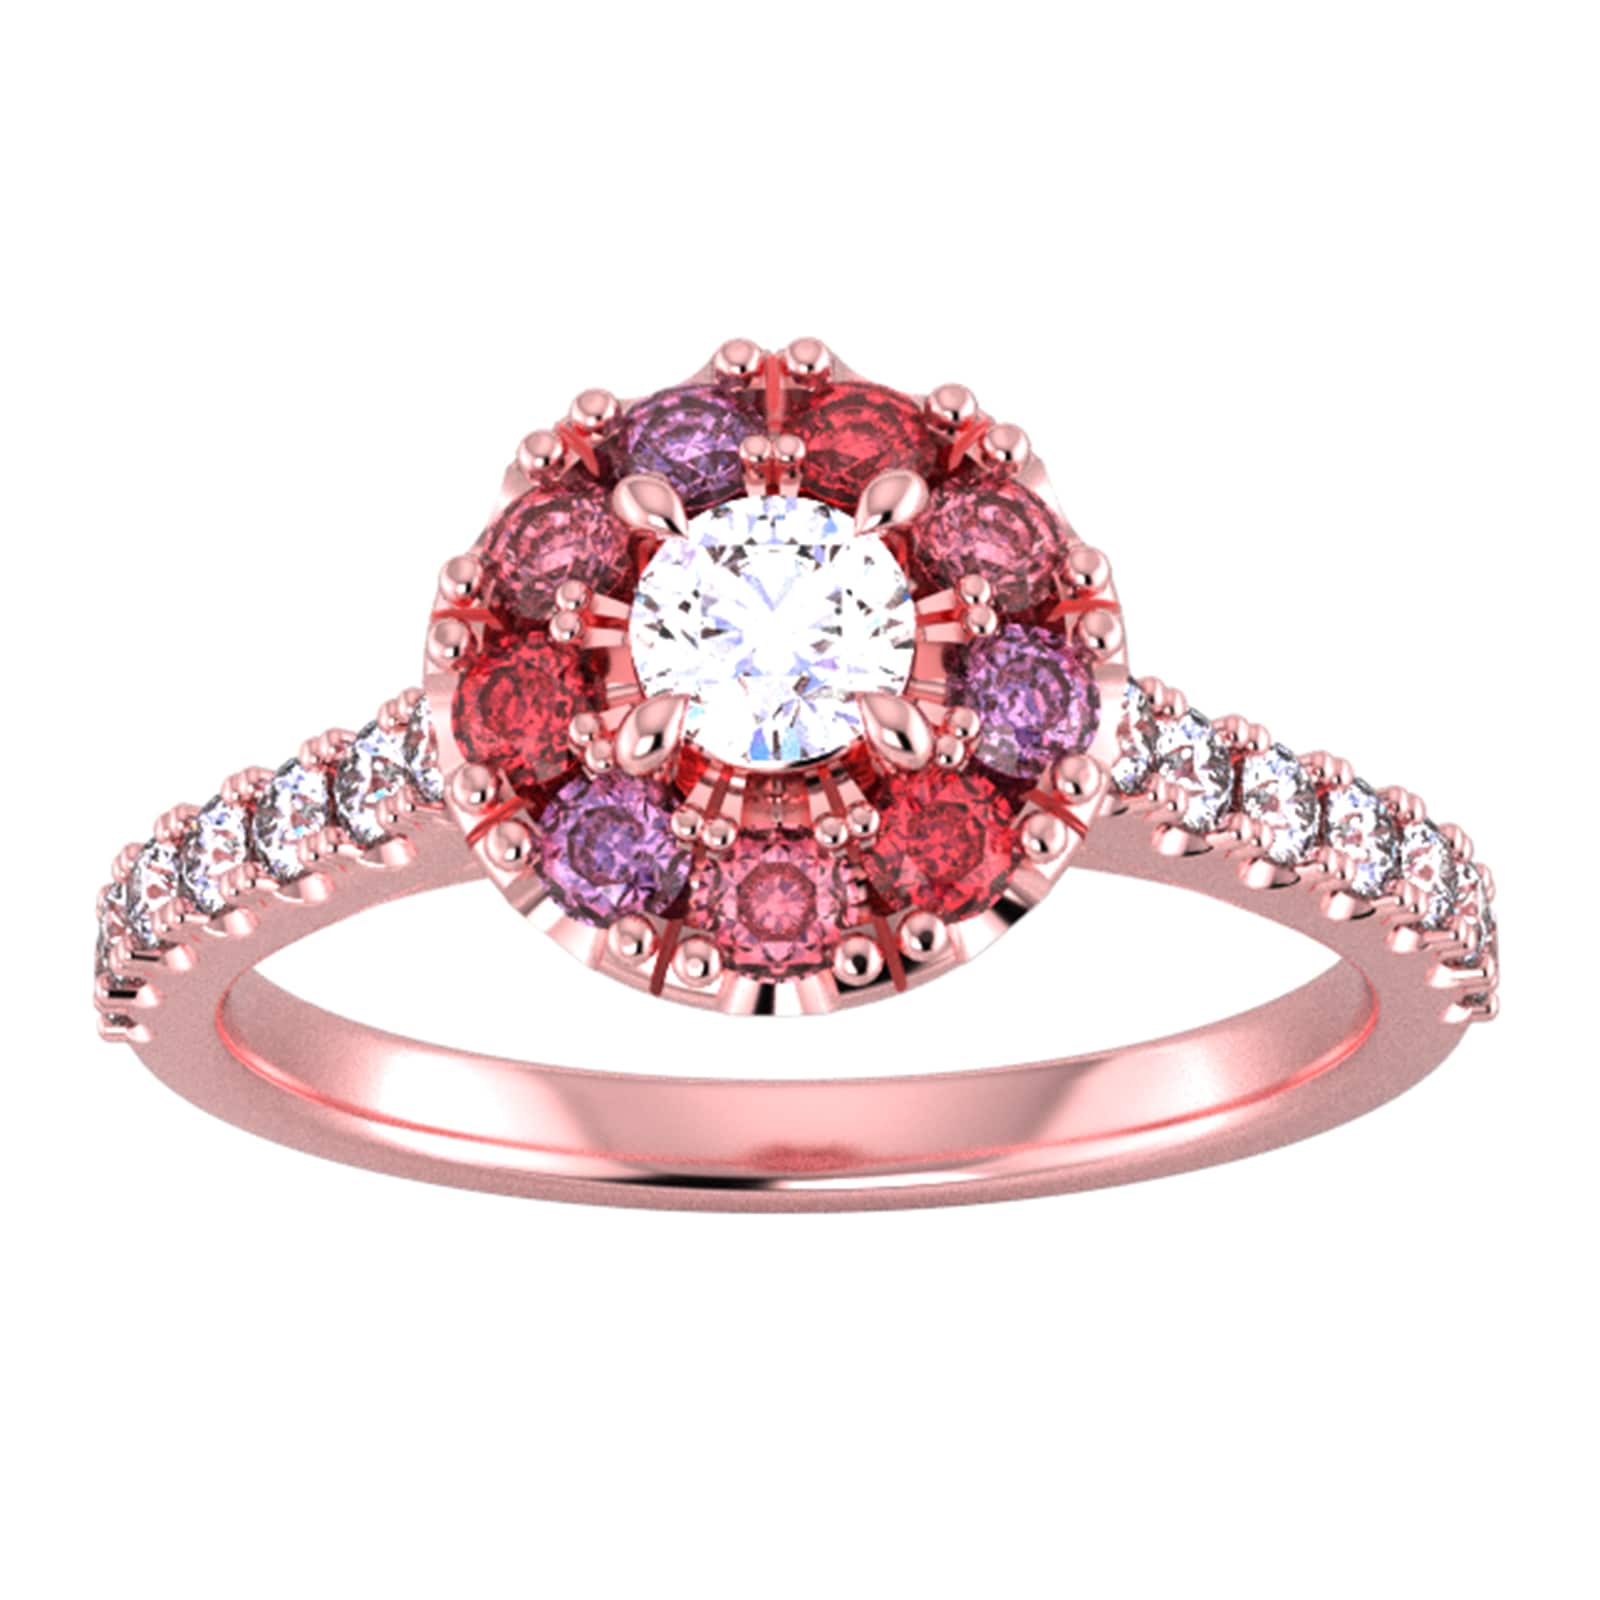 9ct Rose Gold Diamond & Red, Pink, Purple Sapphire Halo Ring - Ring Size G